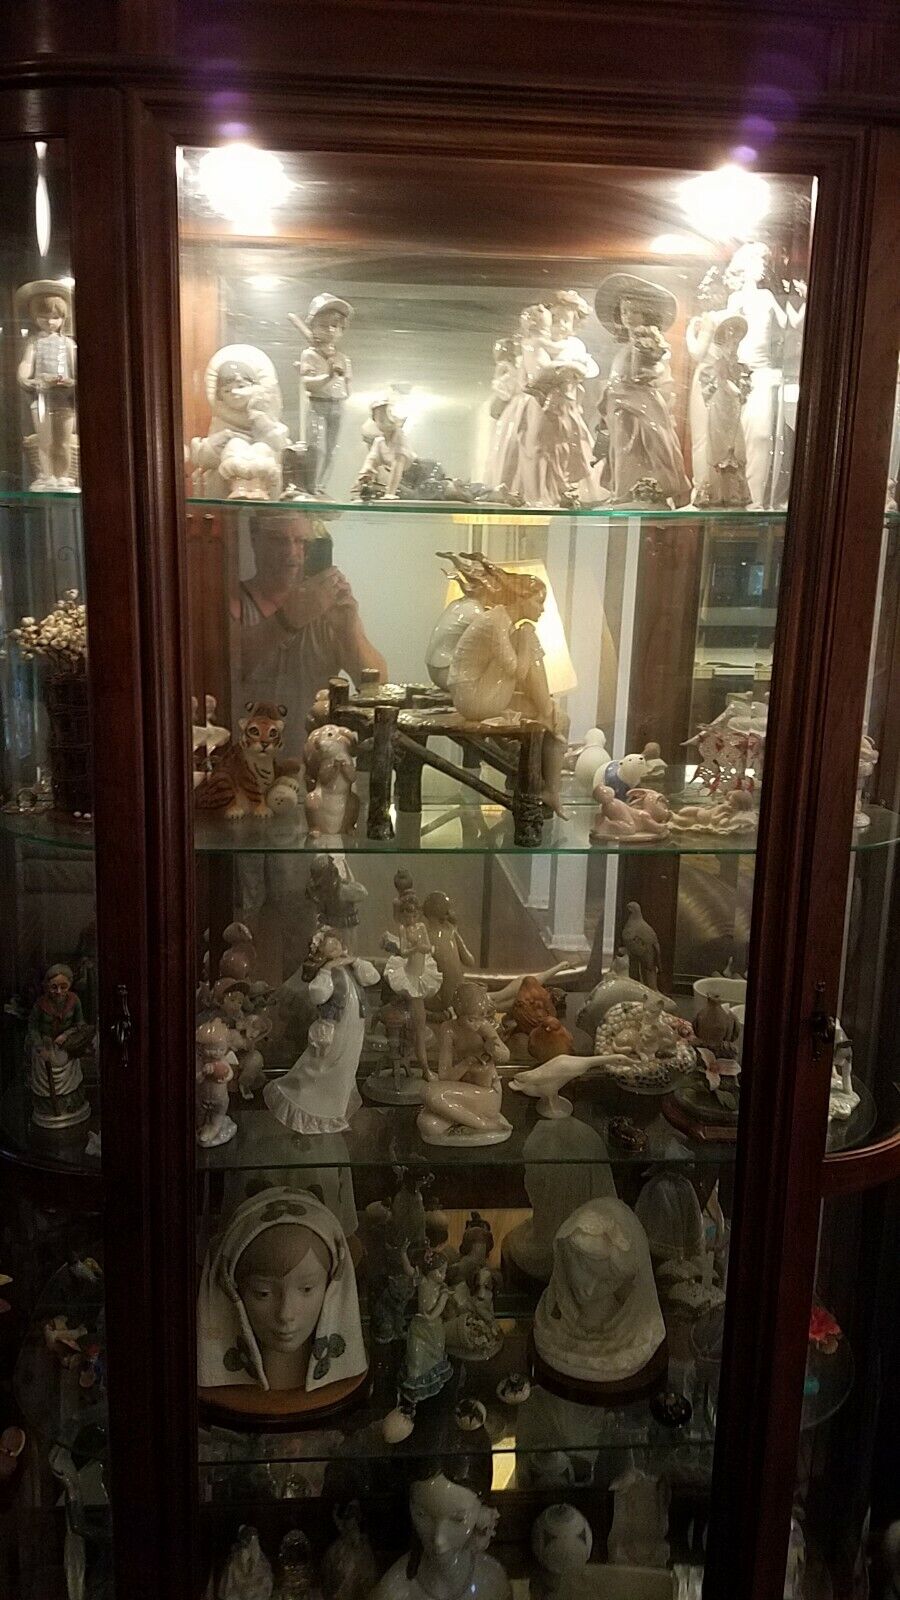 Large 125+ Piece Lladro Collection - Many Retired